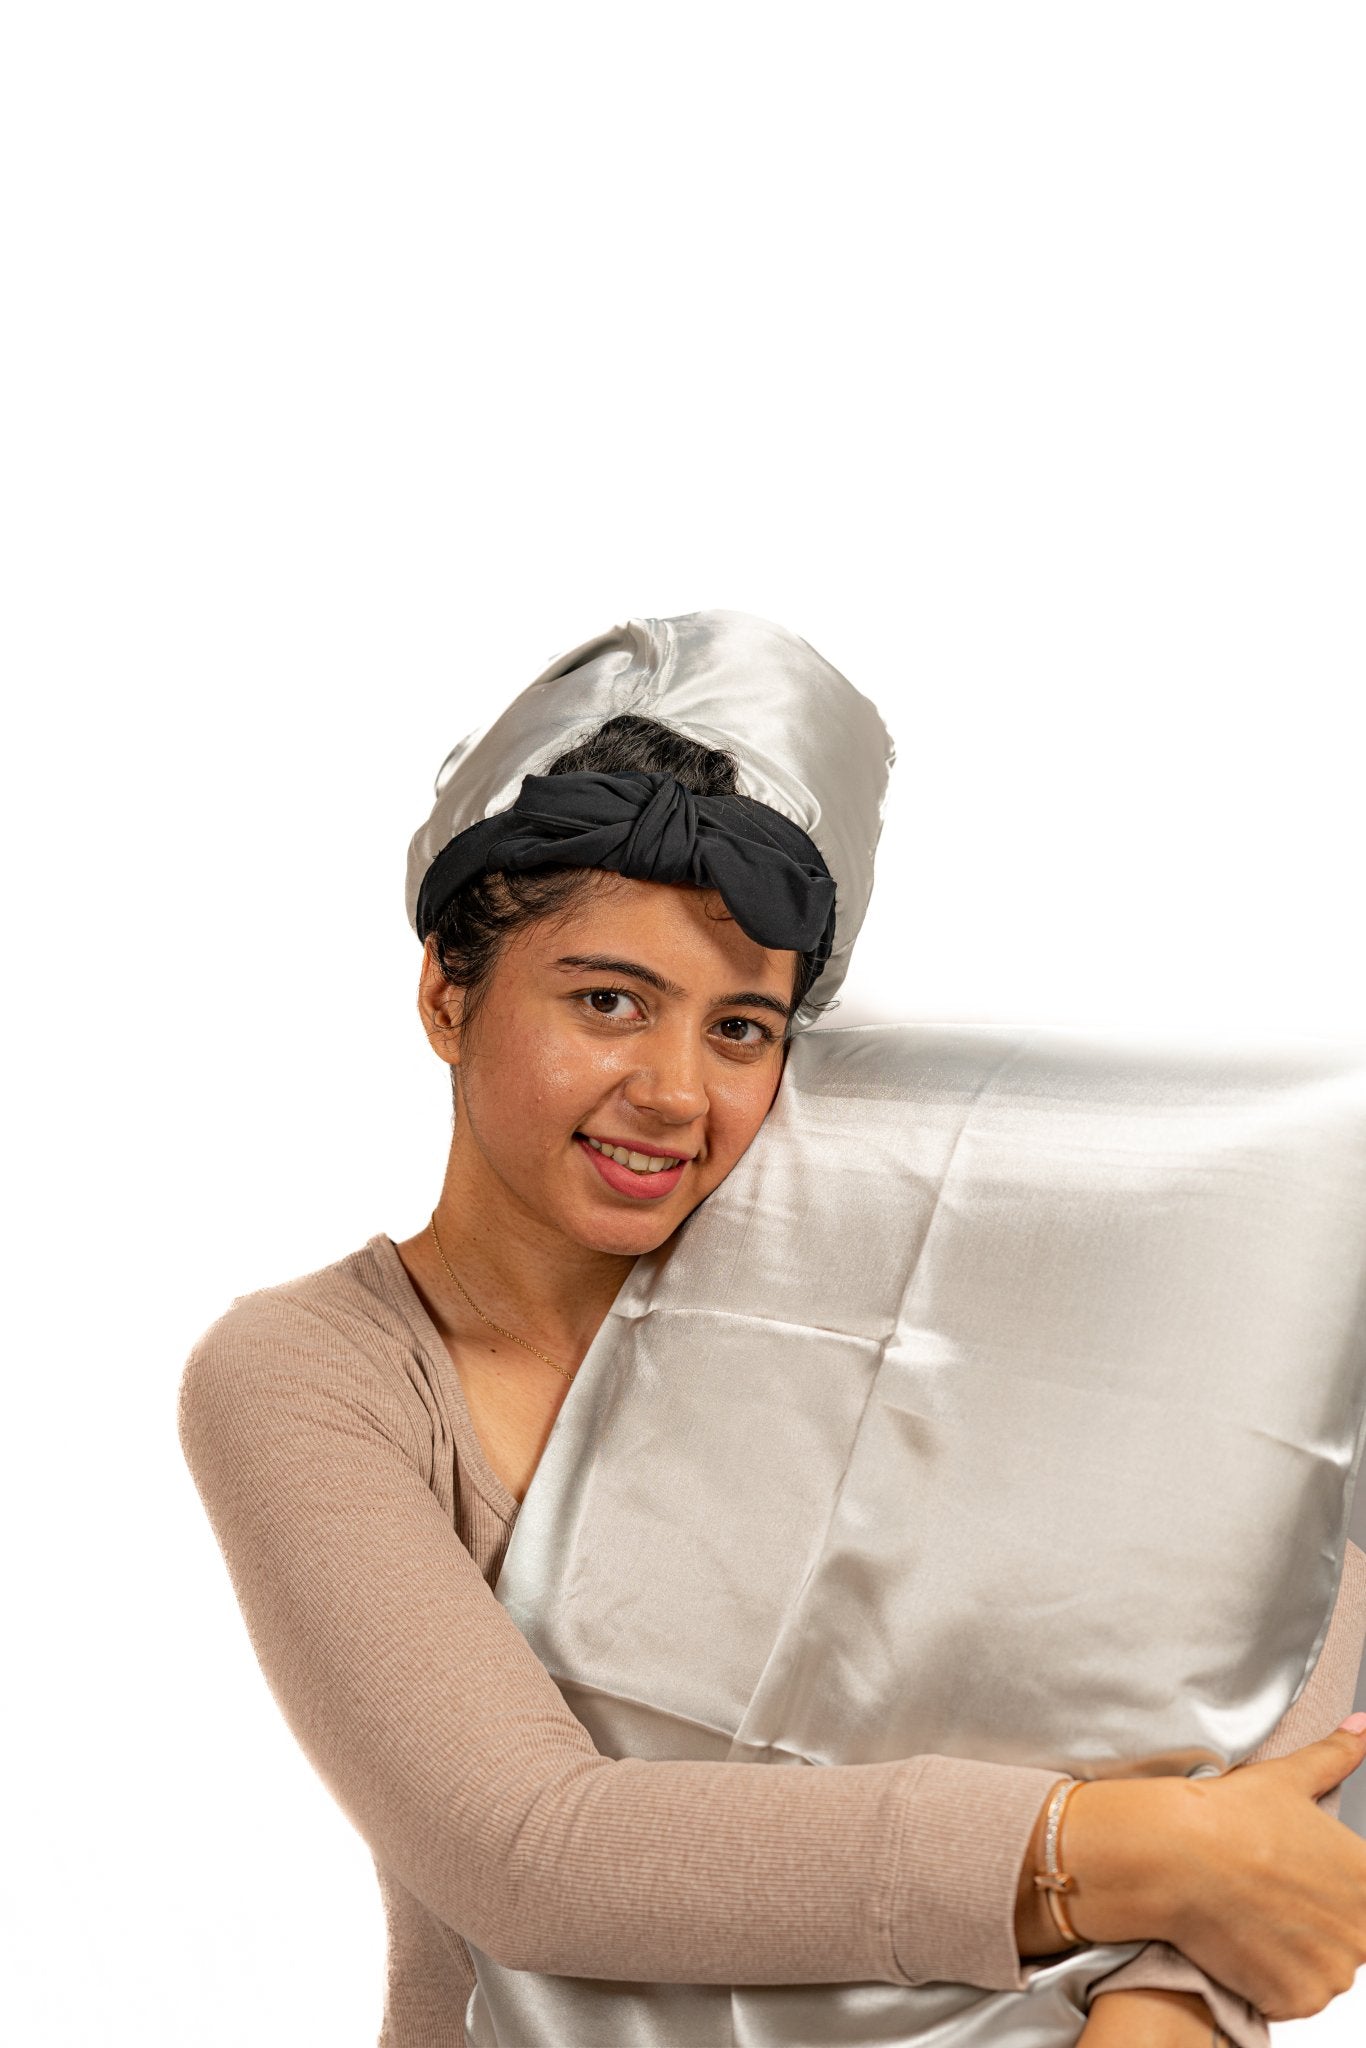 Slip by Curl Cure: Satin Pillowcase - #CurlProtection (with satin potli) - Curl Cure